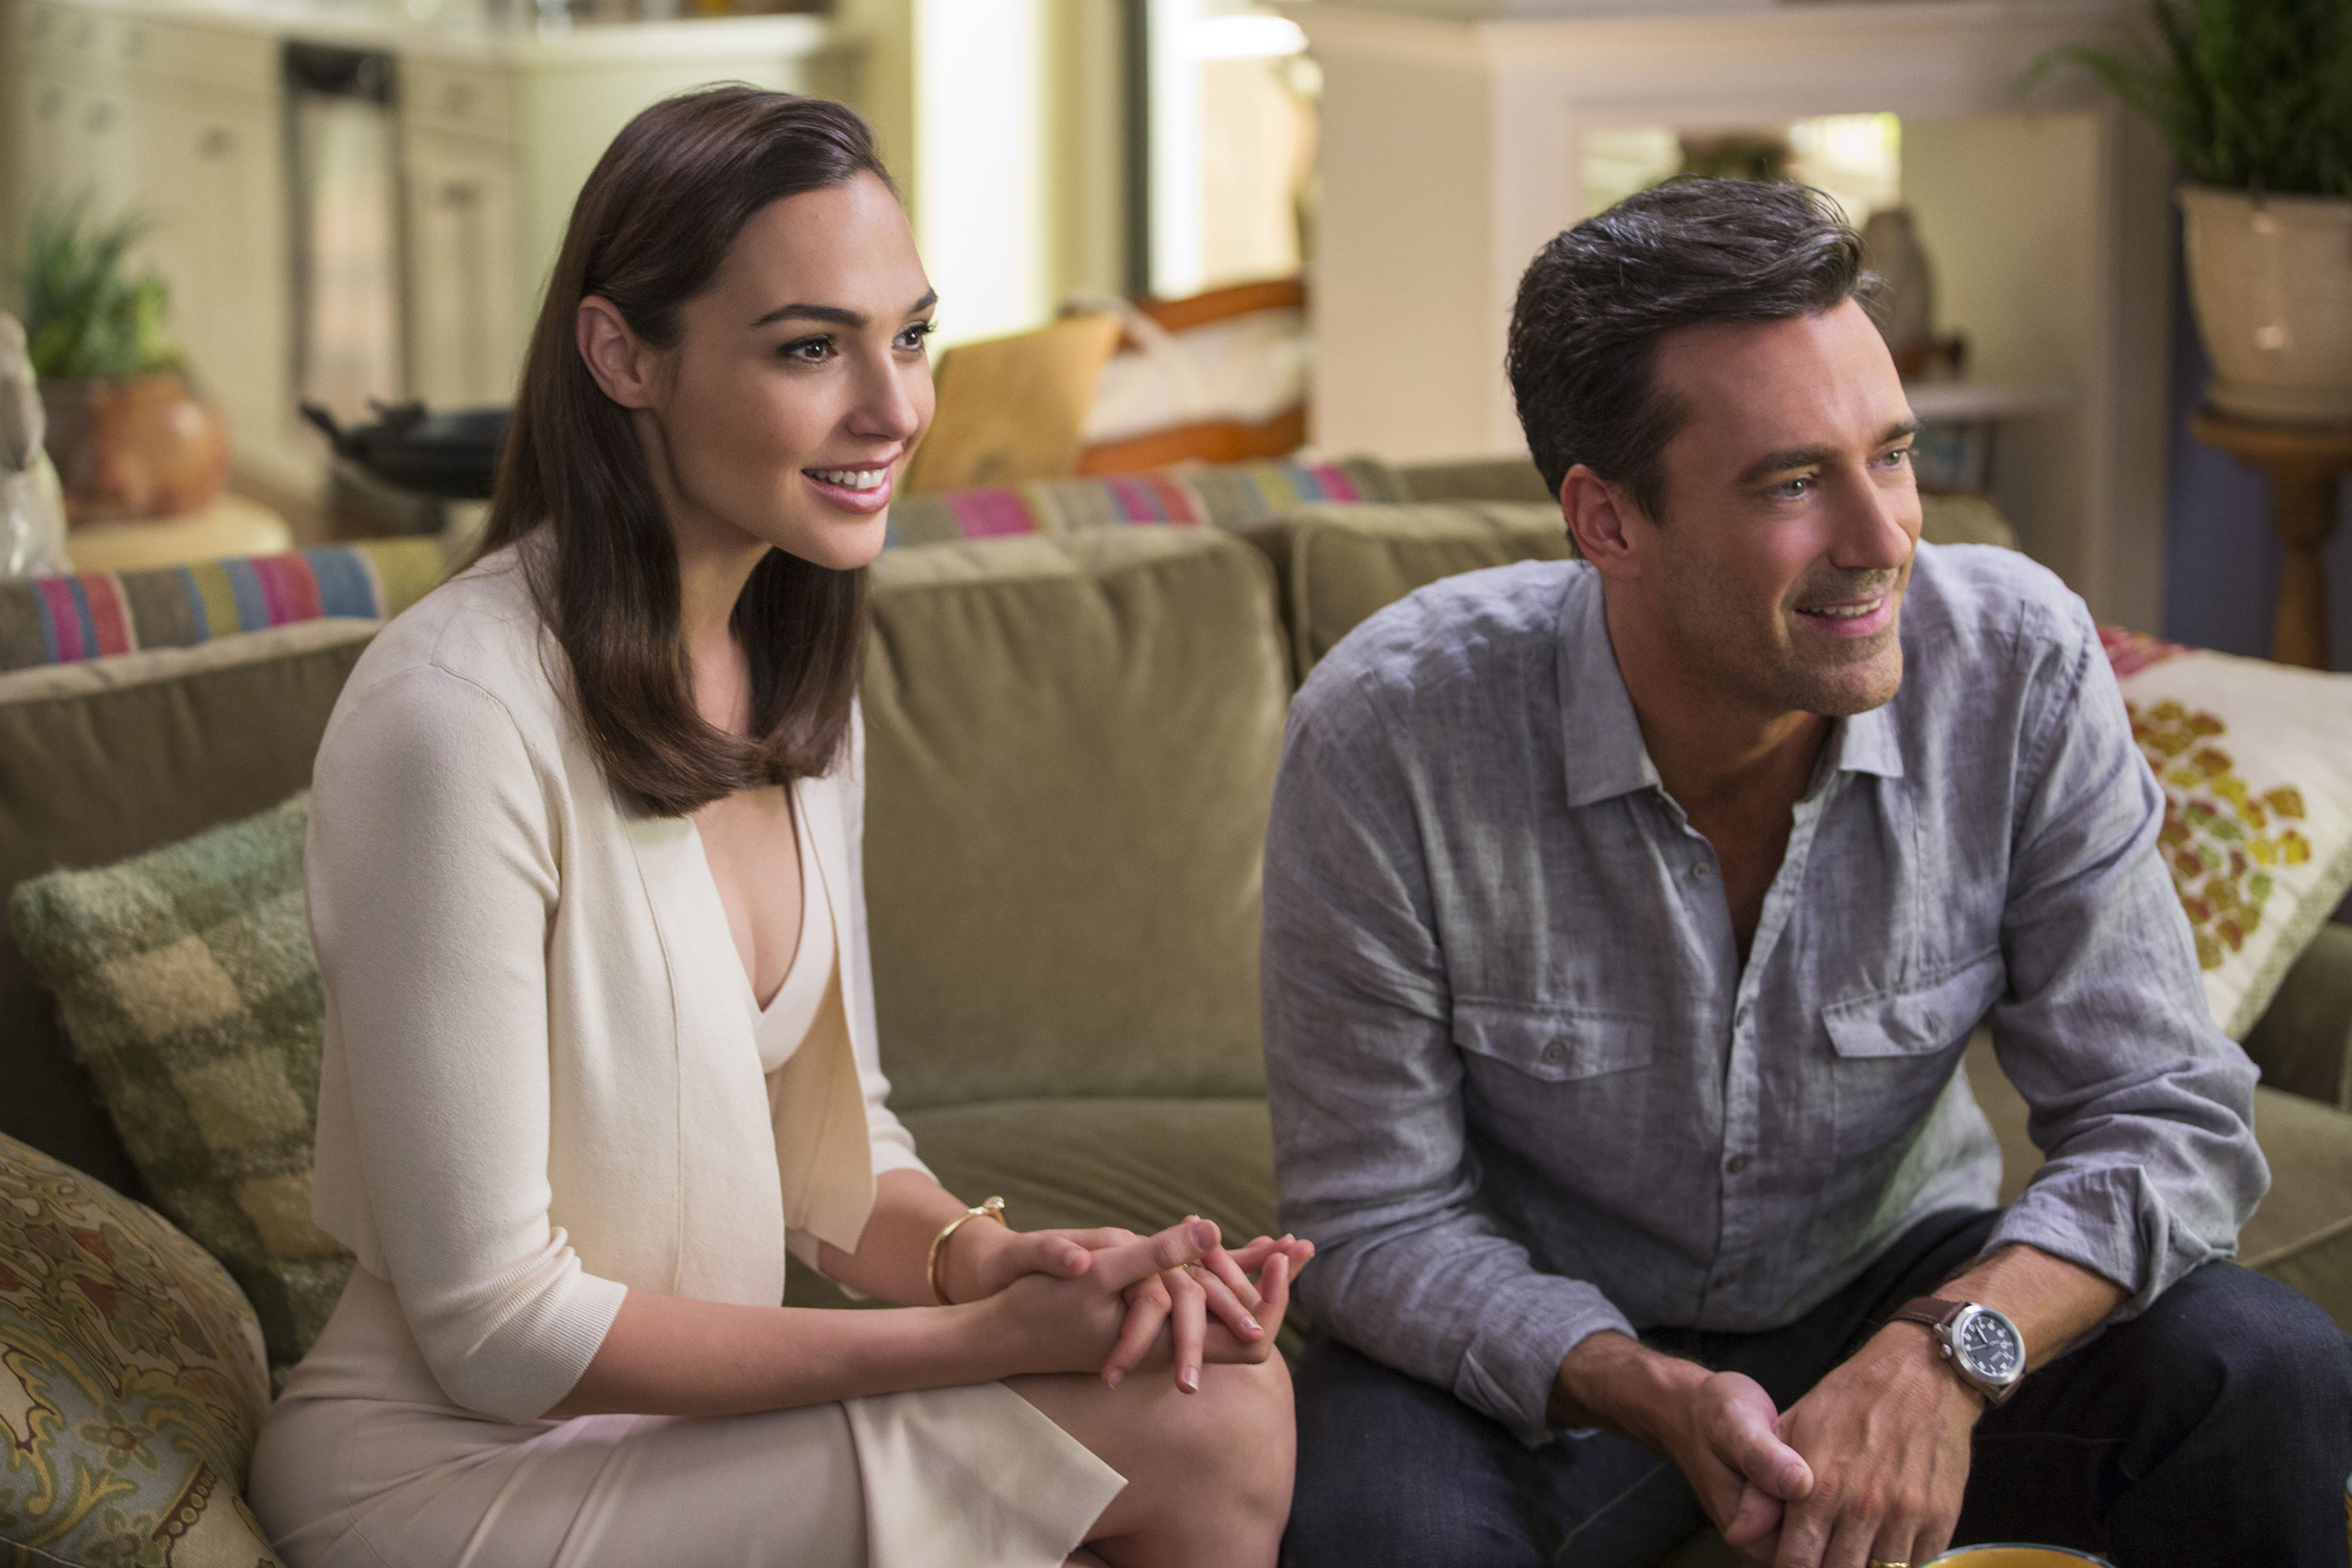 keeping up with the joneses, gal gadot, 2016 movies, two people